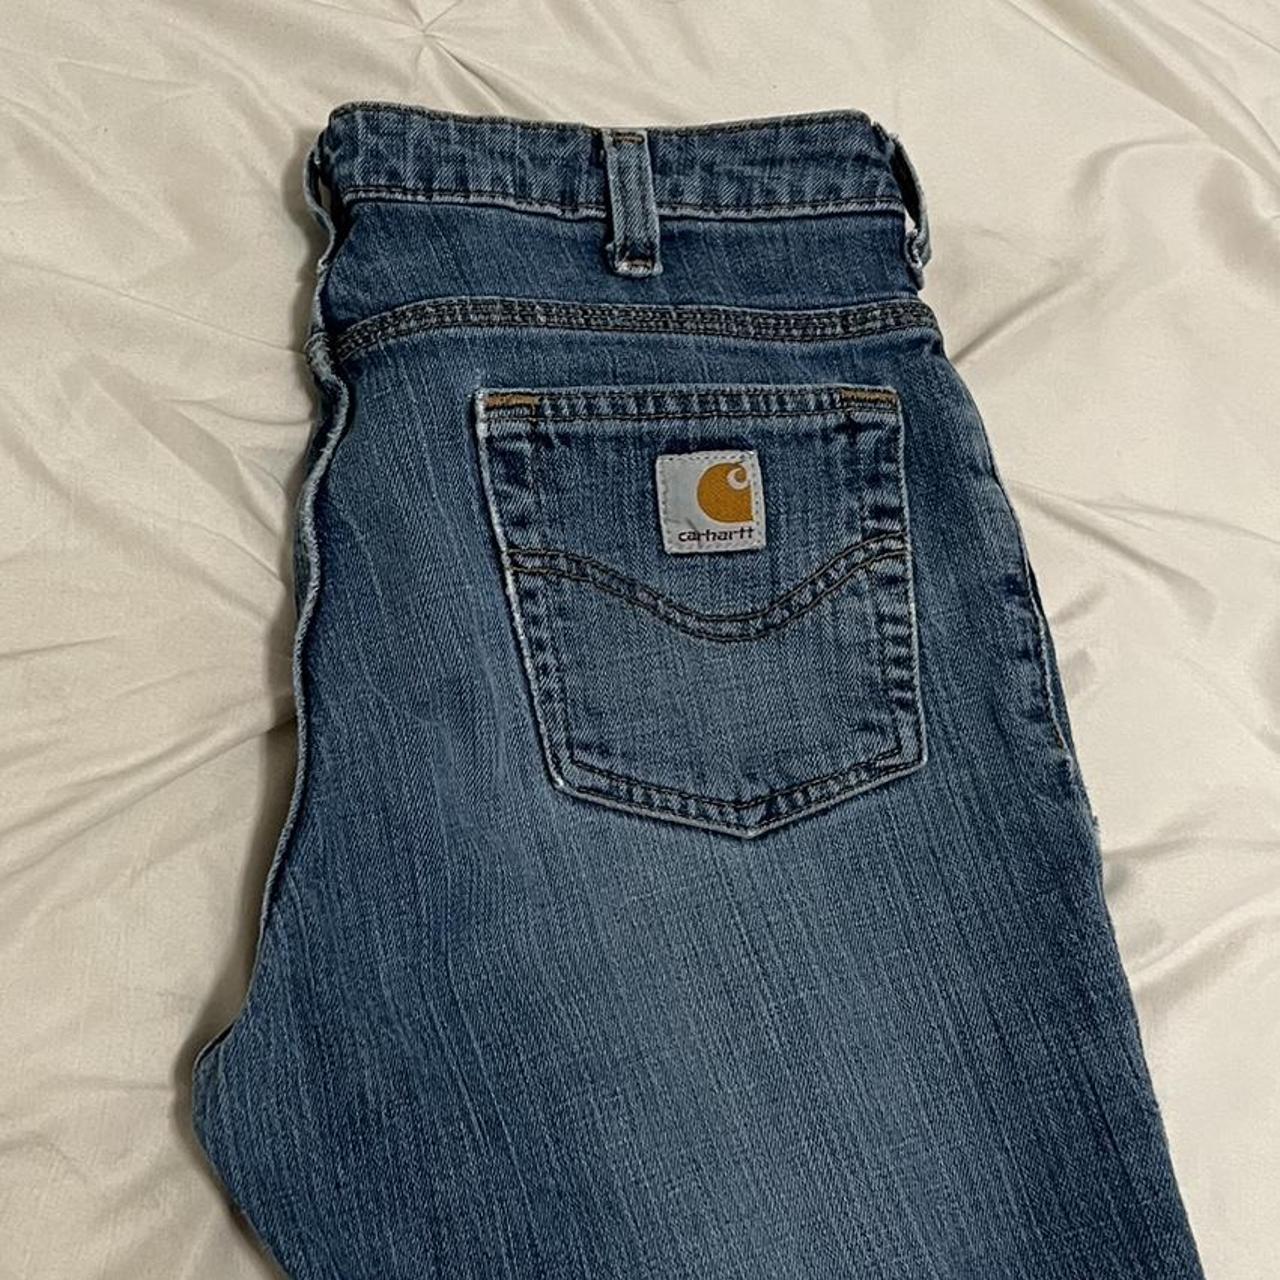 Carhartt Low rise jeans these pair of carhartt... - Depop